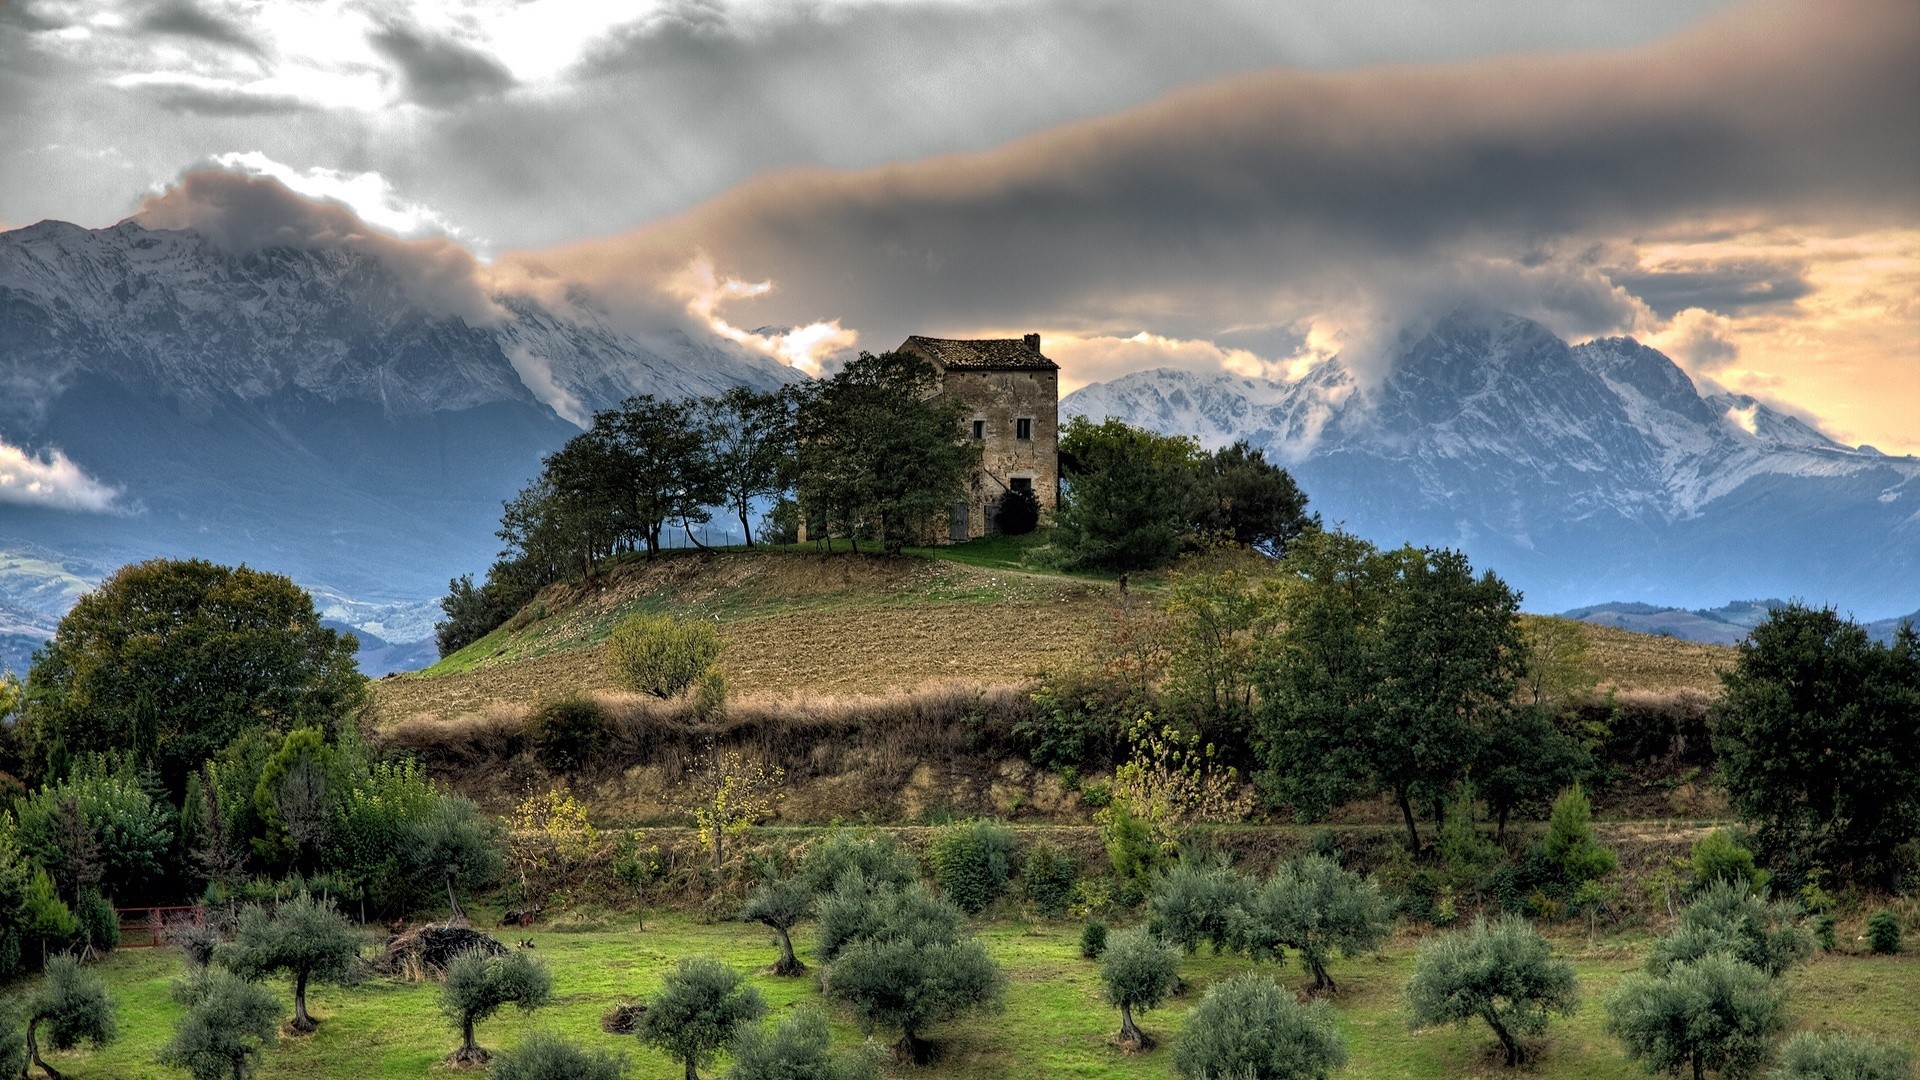 General 1920x1080 HDR nature landscape old building mountains hills Italy sky cropped